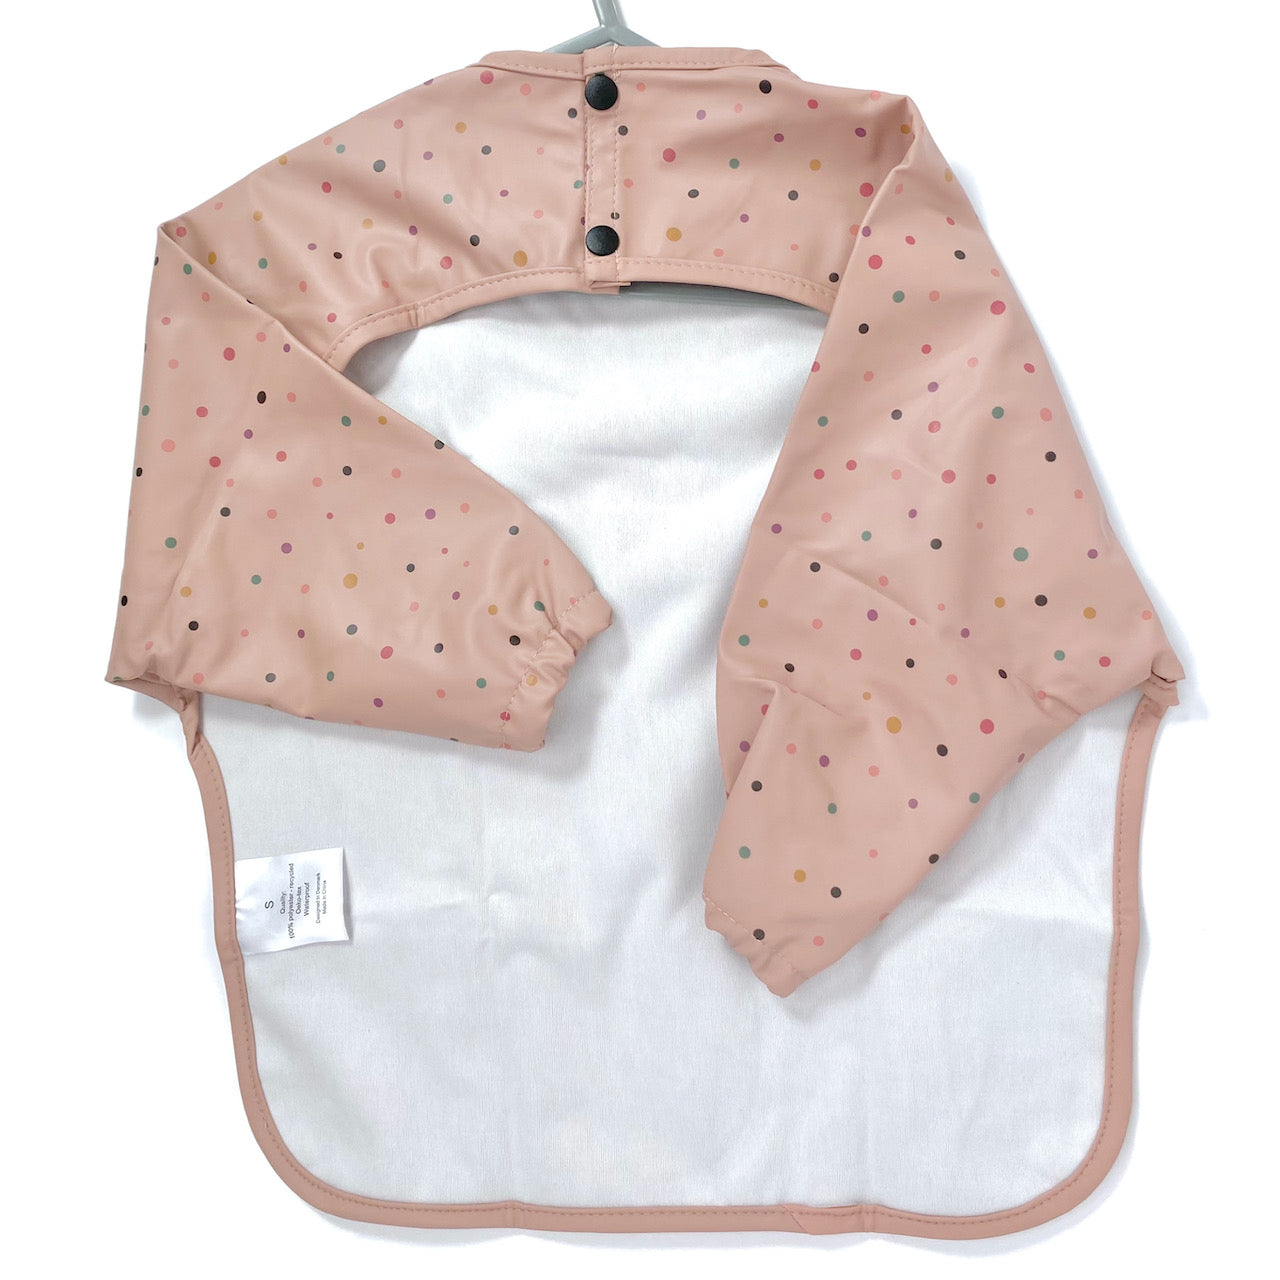 Long-sleeve kids apron in a rose pink and dotty design, showing back view.